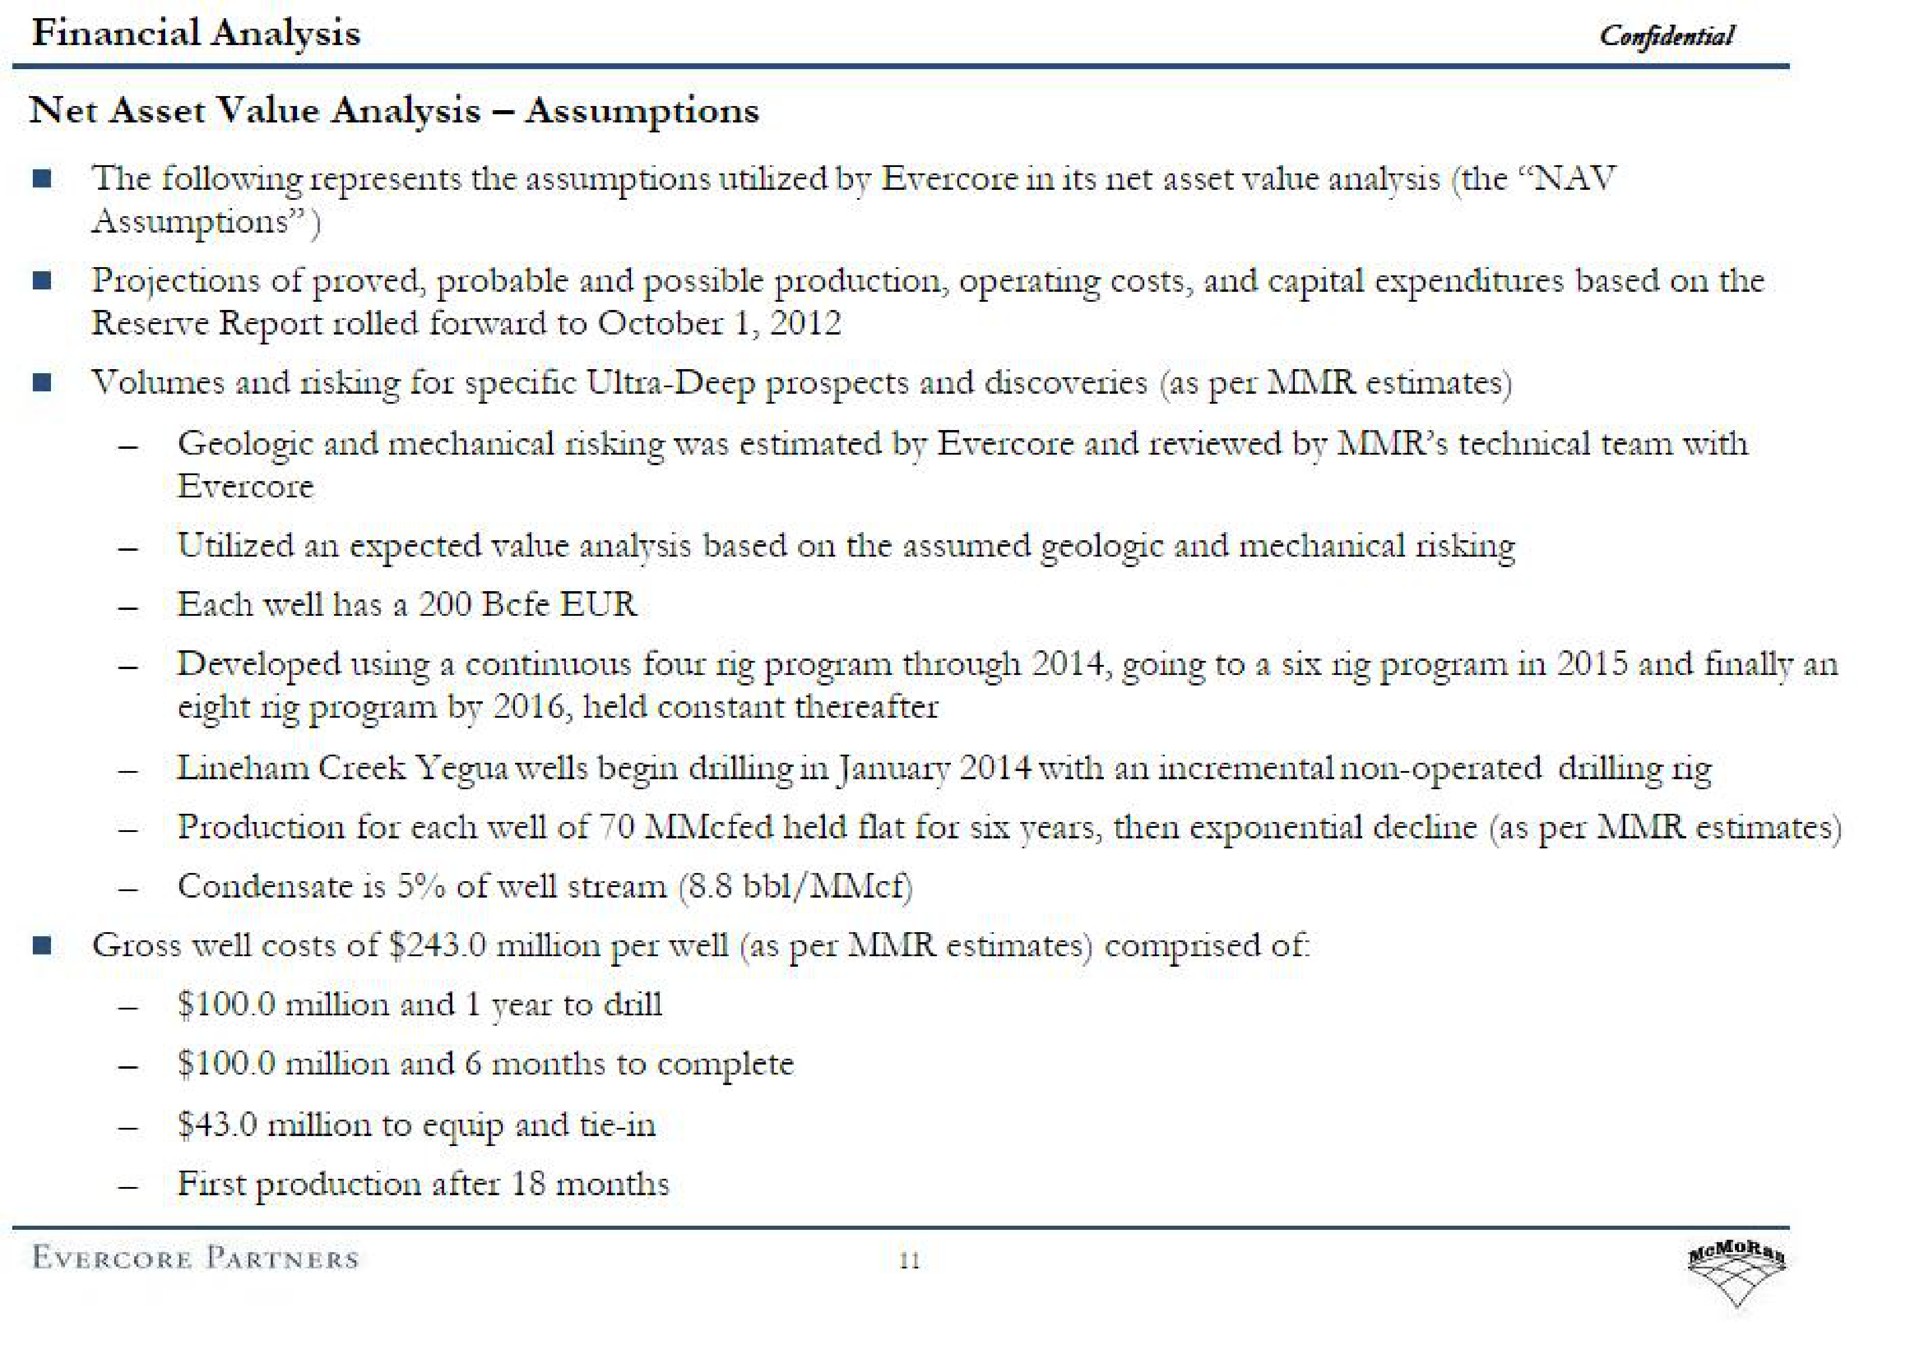 financial analysis net asset value analysis assumptions confidential projections of proved probable and possible production operating costs and capital expenditures based on the volumes and for specific ultra deep prospects and discoveries as per utilized an expected value analysis based on the assumed geologic and mechanical each well has a developed using a continuous four program through going to a six program in and finally an creek wells begin in with an operated drilling | Evercore